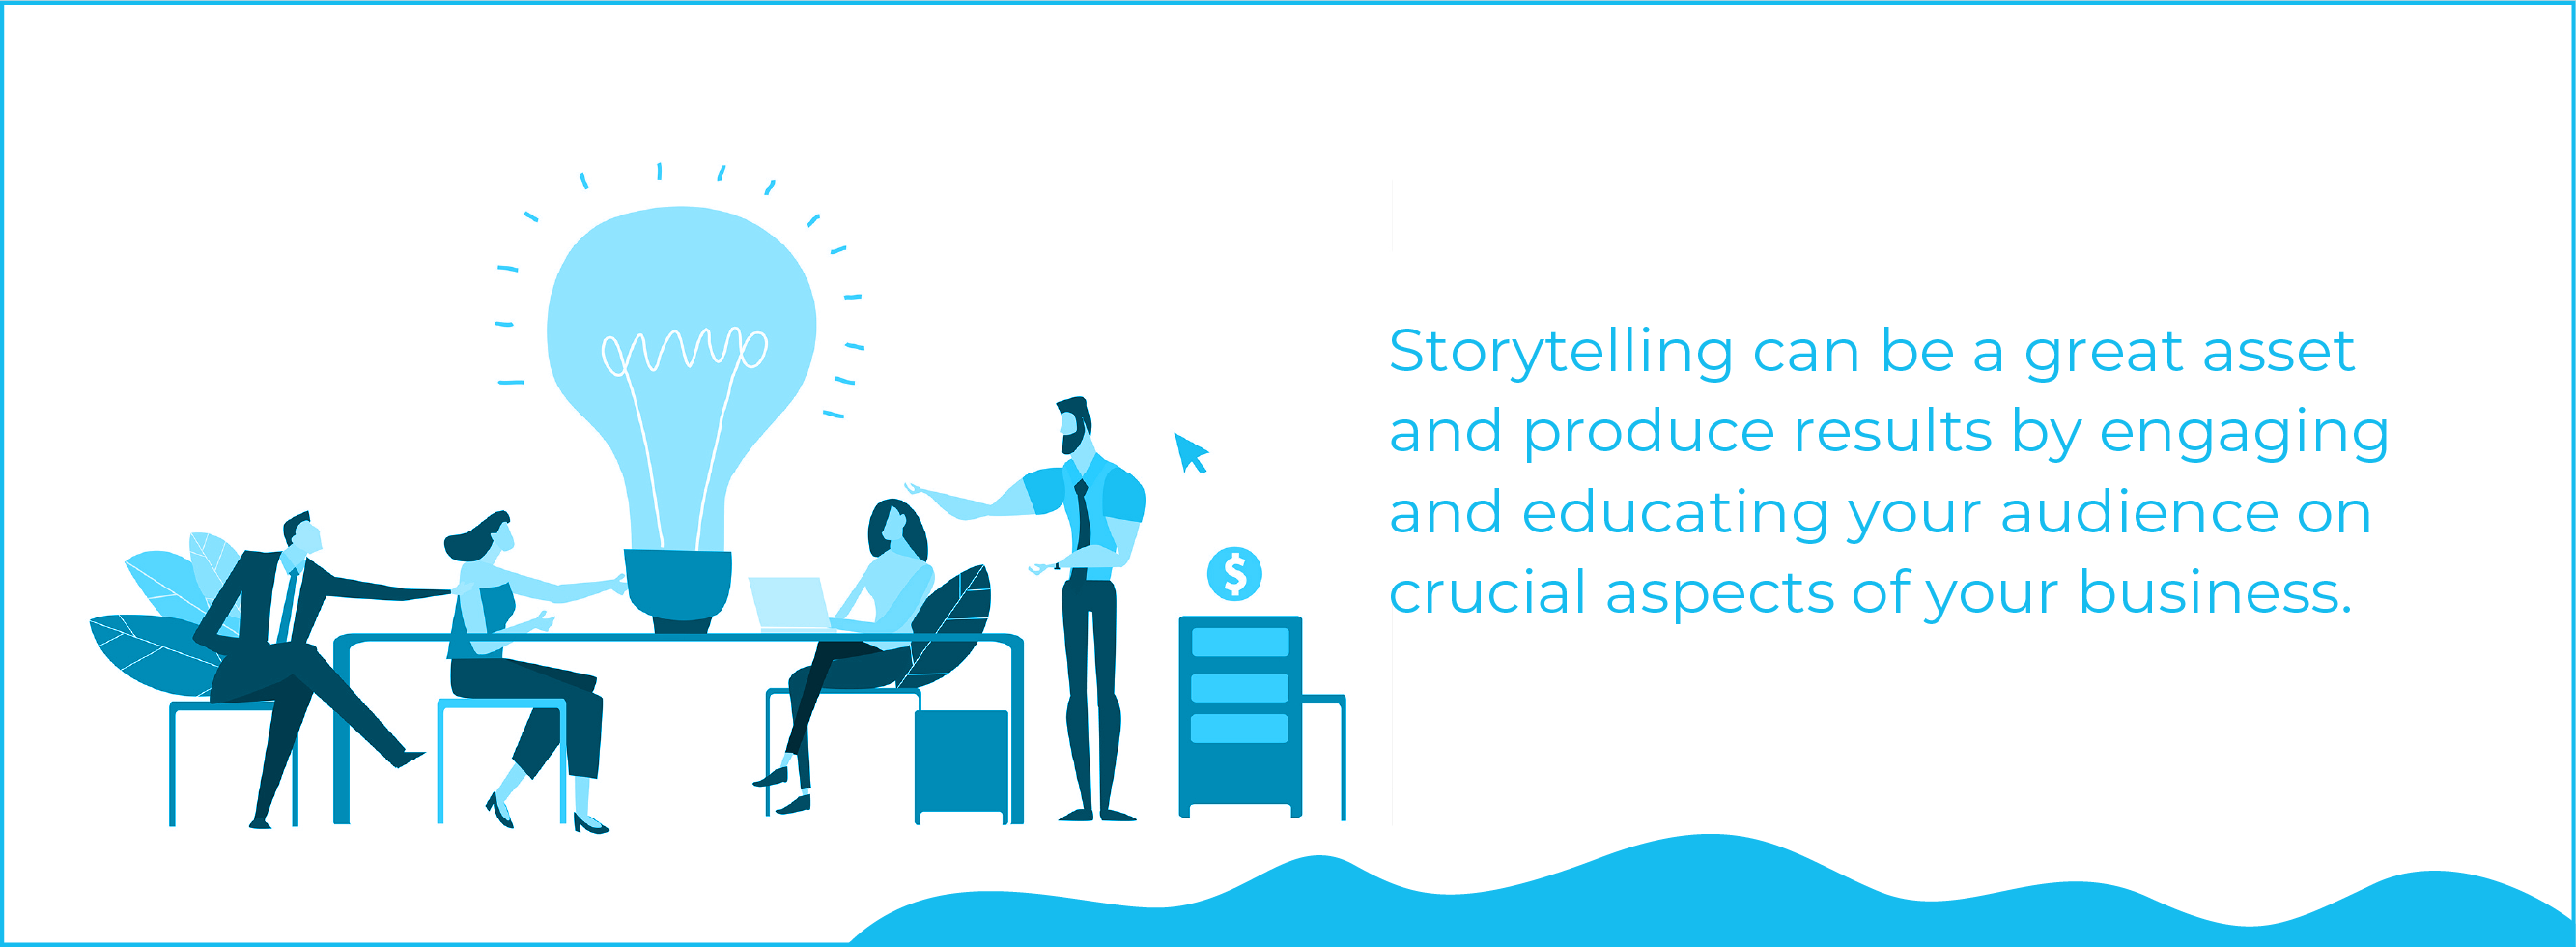 Storytelling can be a great asset and produce results by engaging and educating your audience on crucial aspects of your business